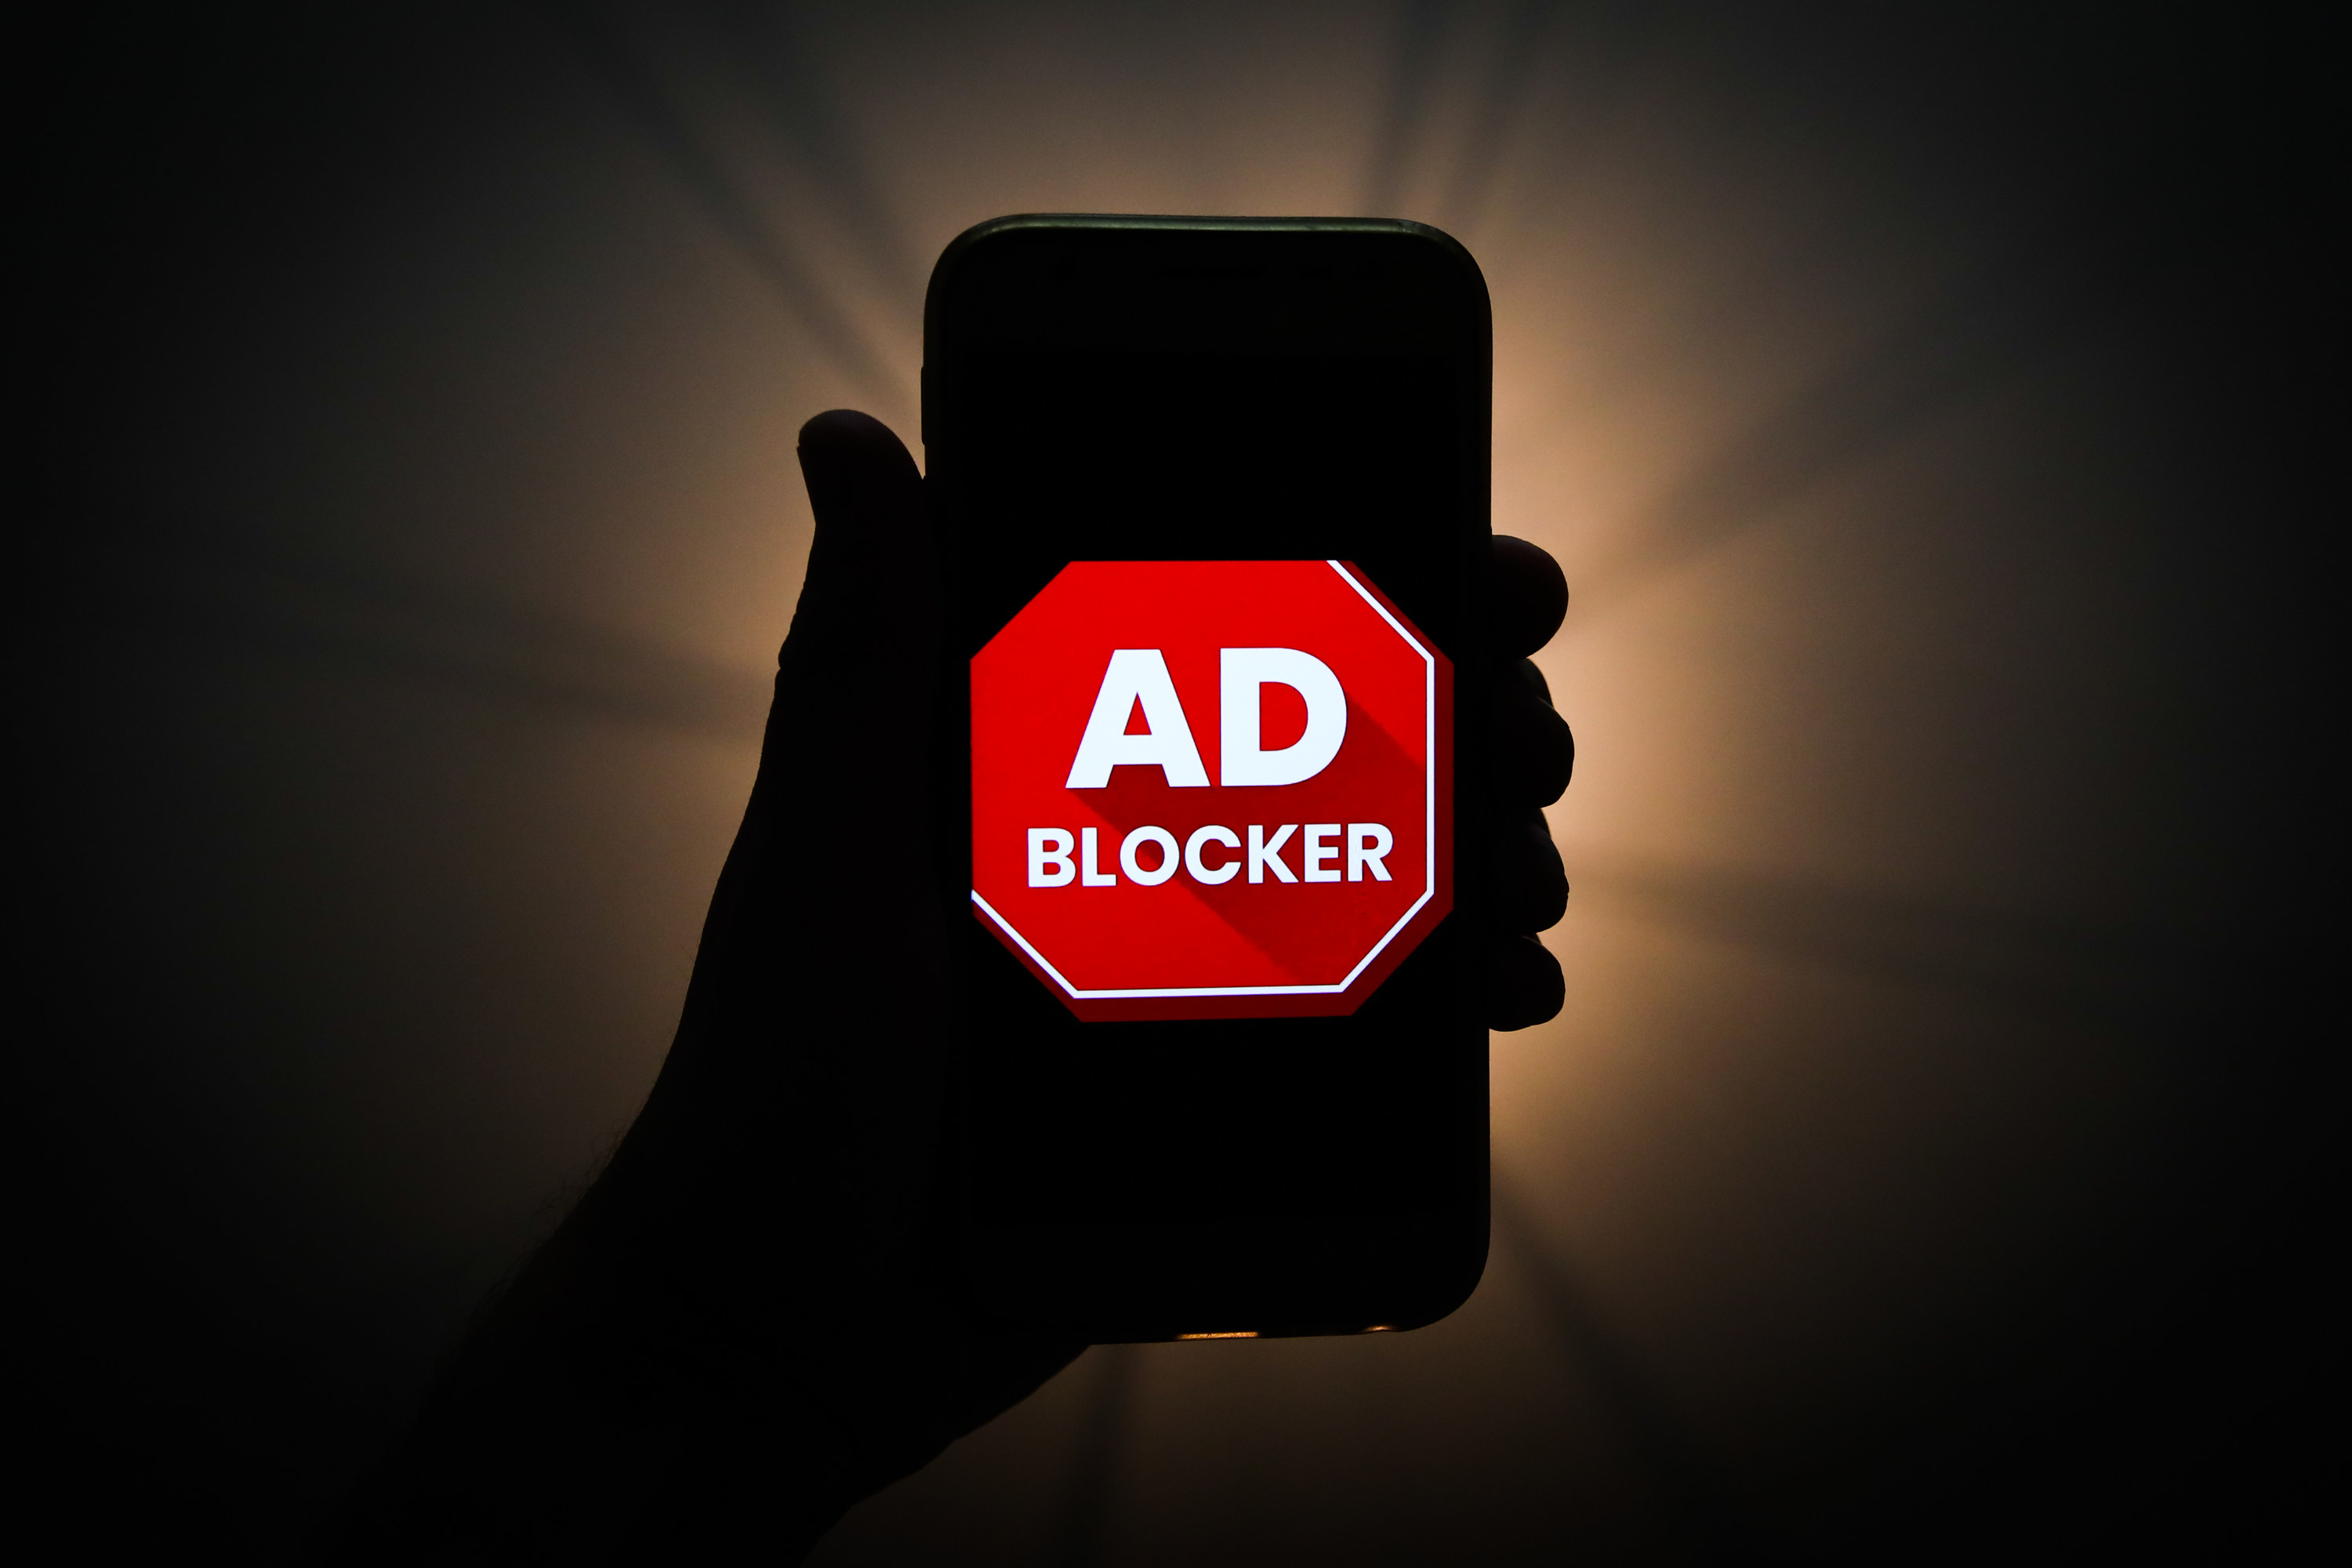 Ad blocker logo shown on the silhouette of a smartphone 